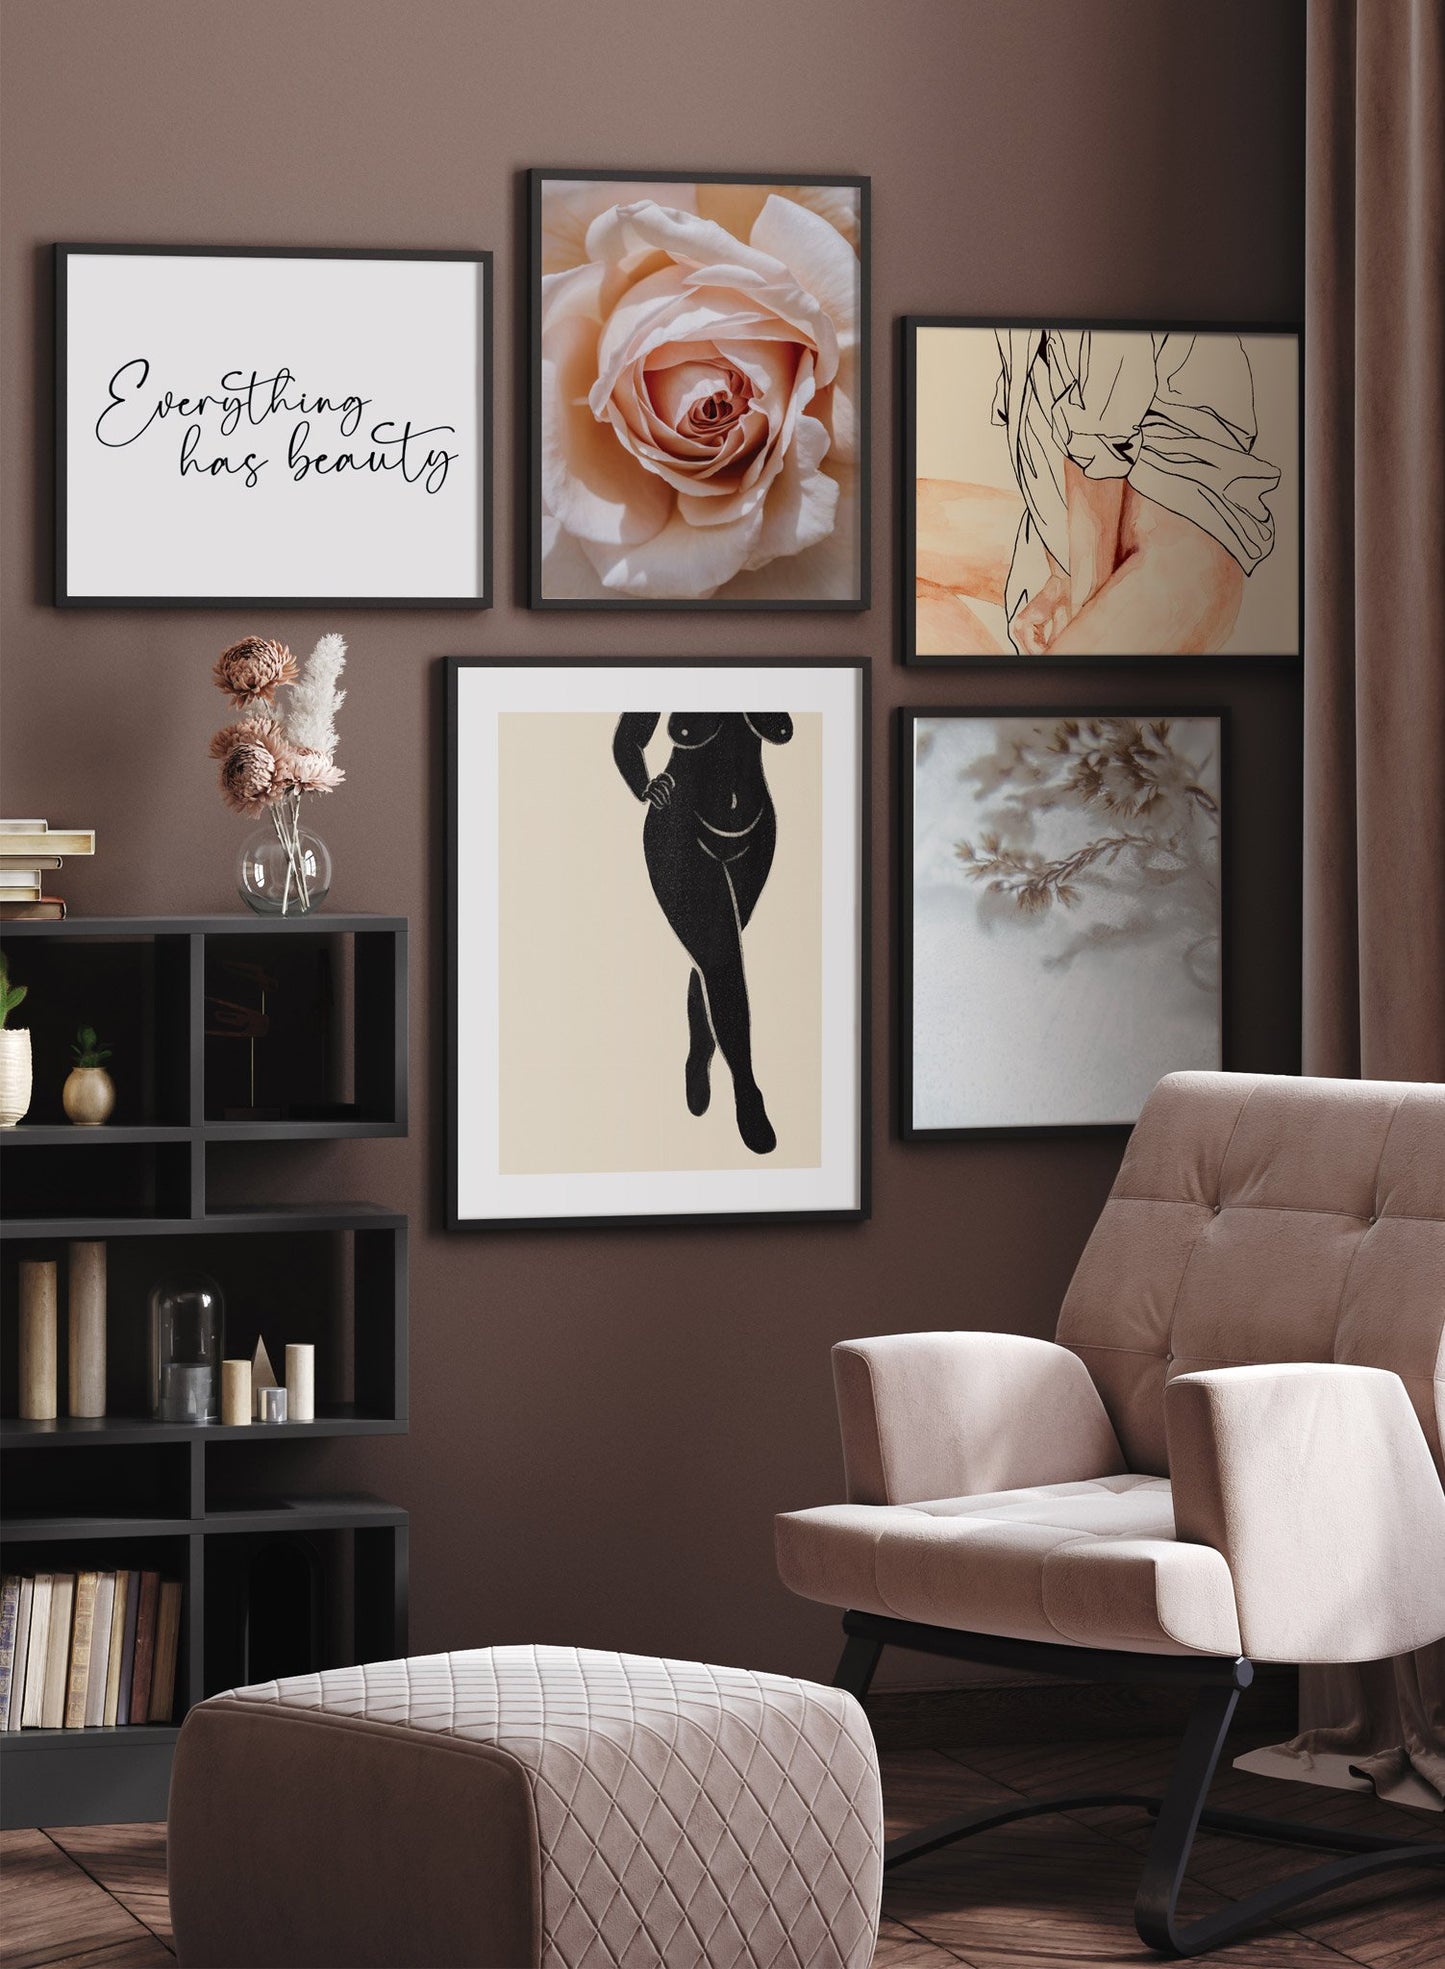 "Lookin' Fine" is a minimalist black, and beige illustration poster by Opposite Wall of curvy and abstract female silhouette in an empowering pose over a beige background.